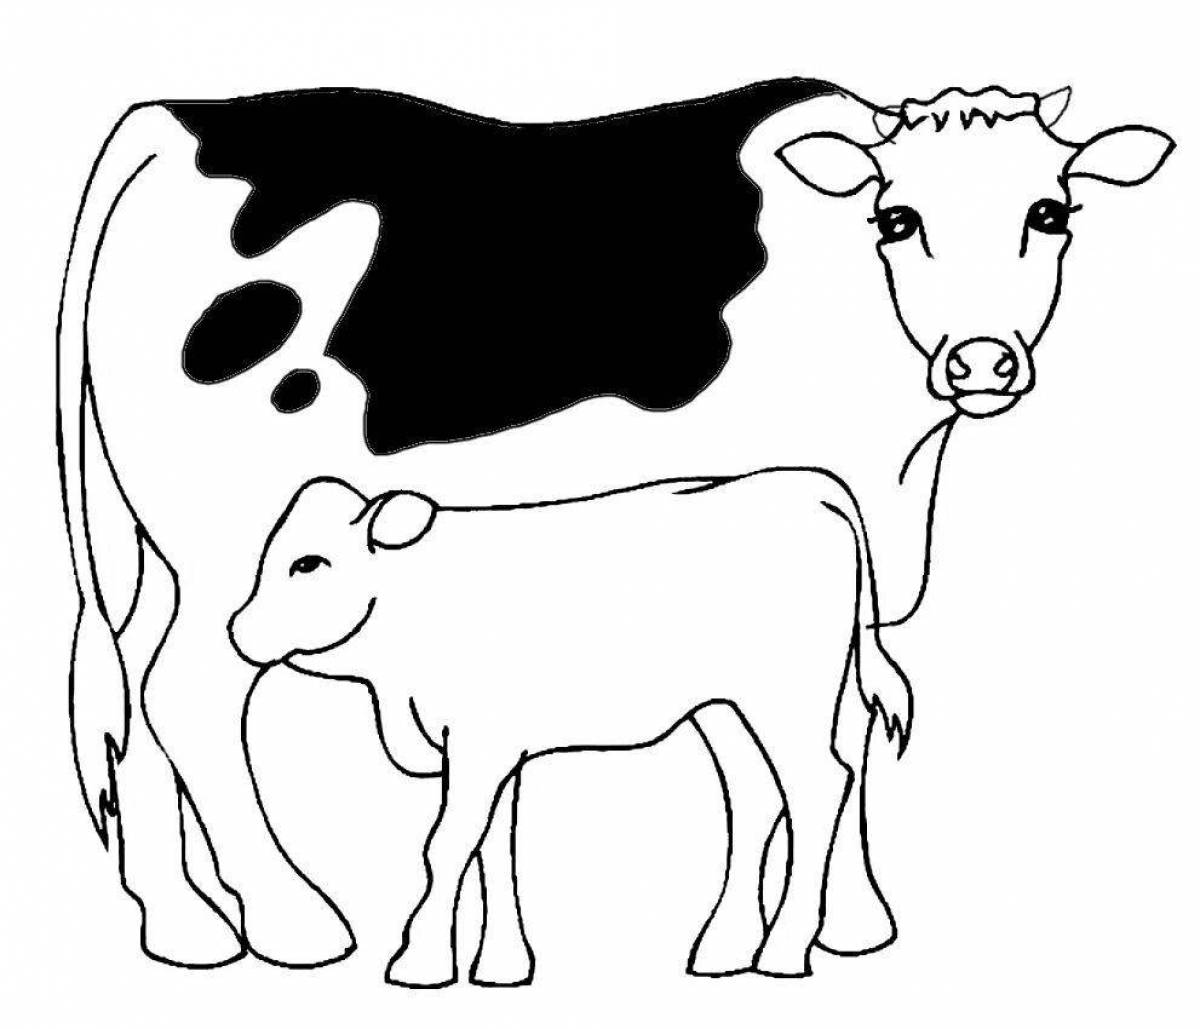 Live cow and calf coloring book